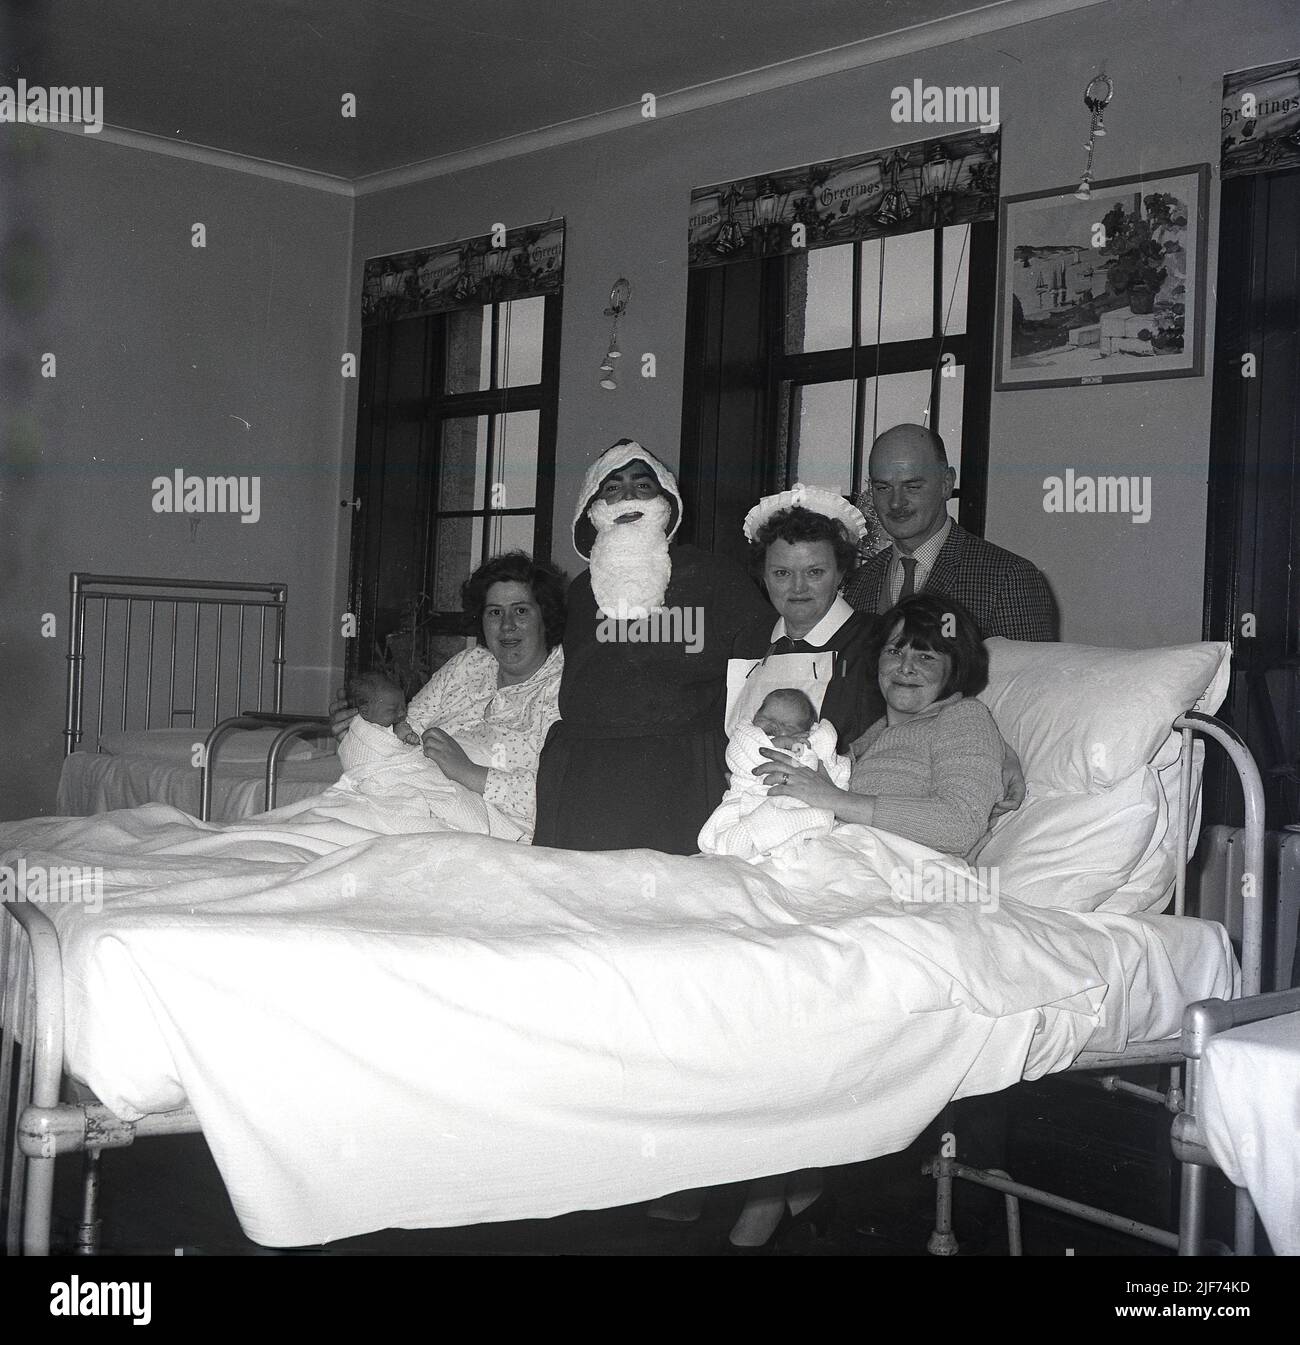 1965, historical, a father christmas visiting a maternity ward, standing for  a photo beisde a nurse and two new mothers lying in hospital beds with their new babies, Fife, Scotland, UK. Stock Photo